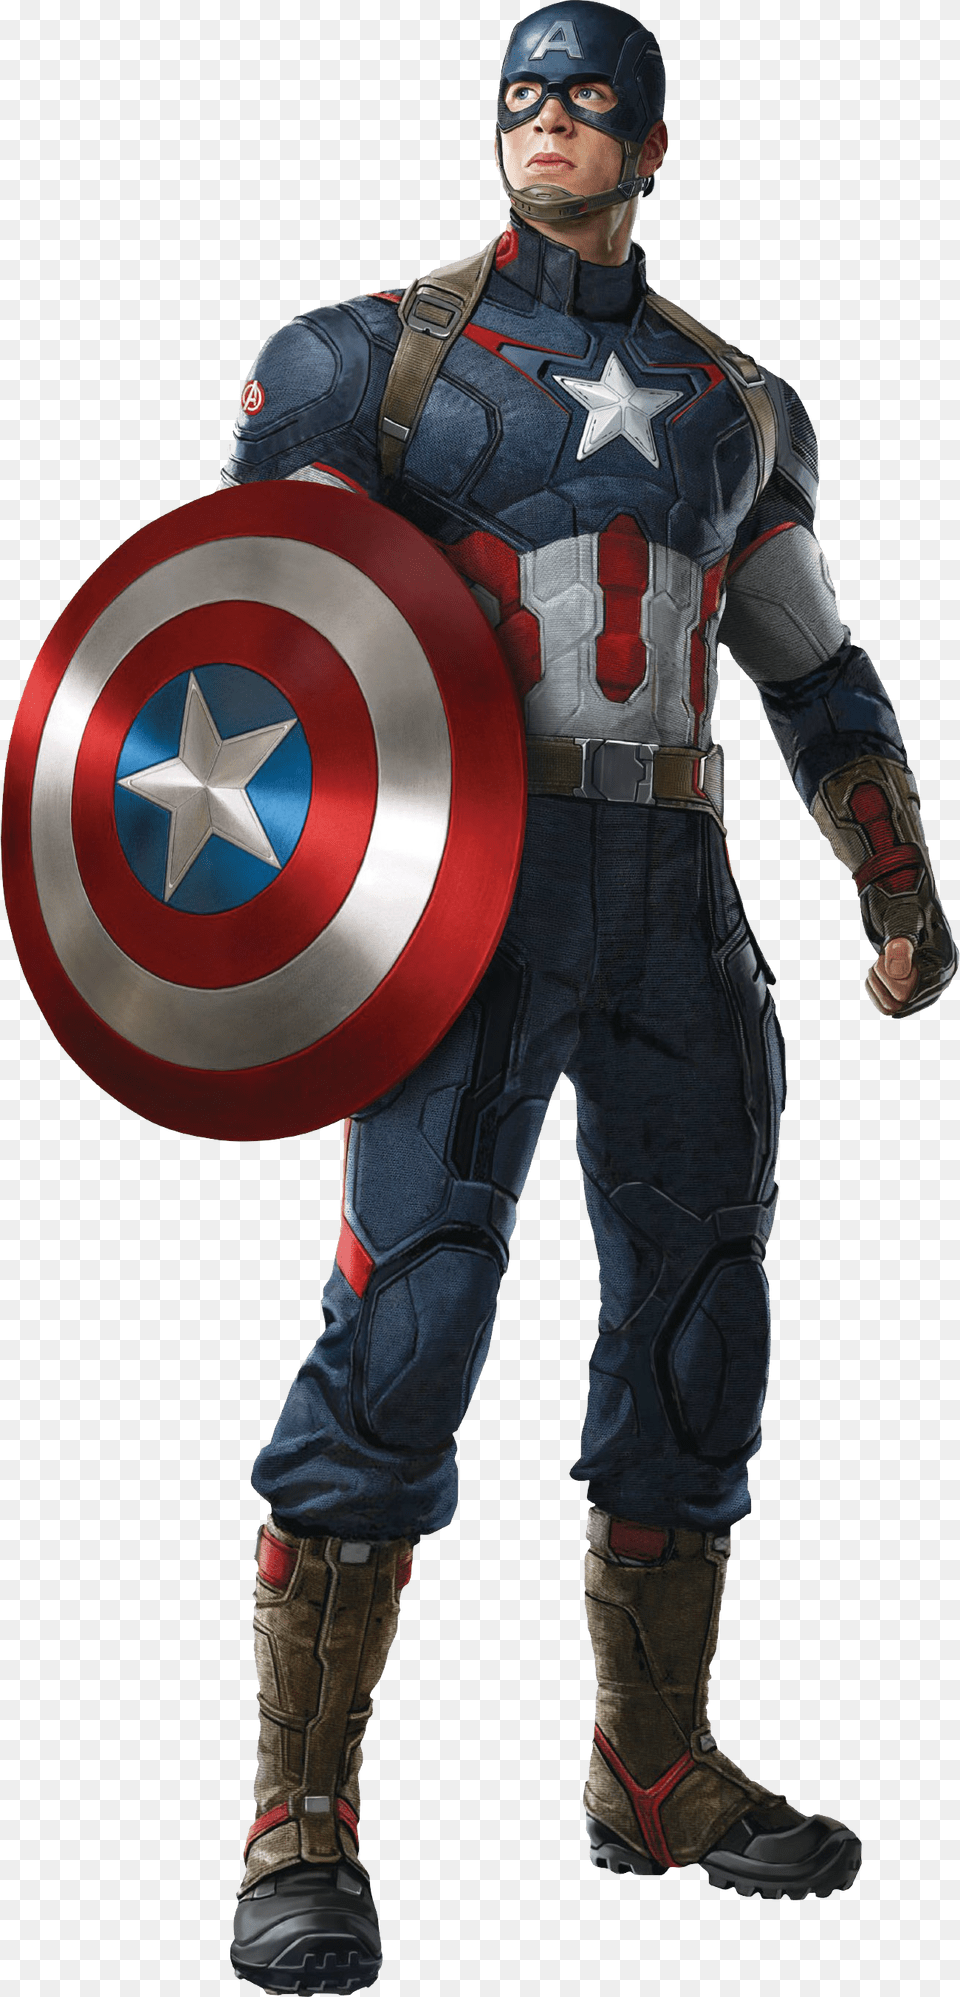 Captain America Hd Avengers 2 Capitan America, Armor, Clothing, Costume, Person Free Png Download